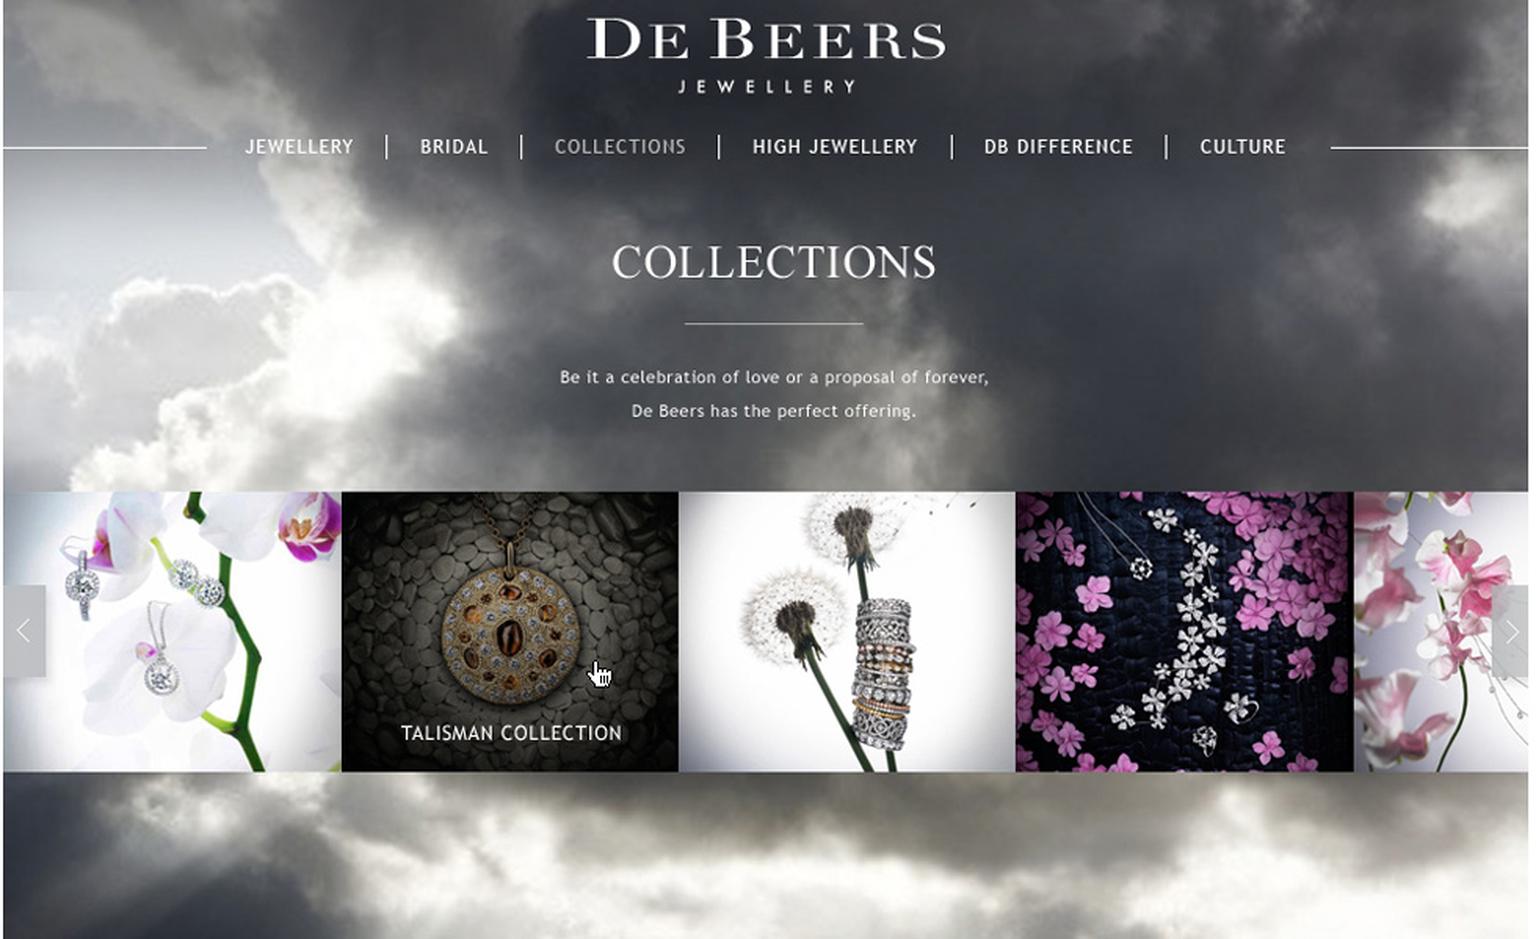 Image from De Beers new website Collections Page